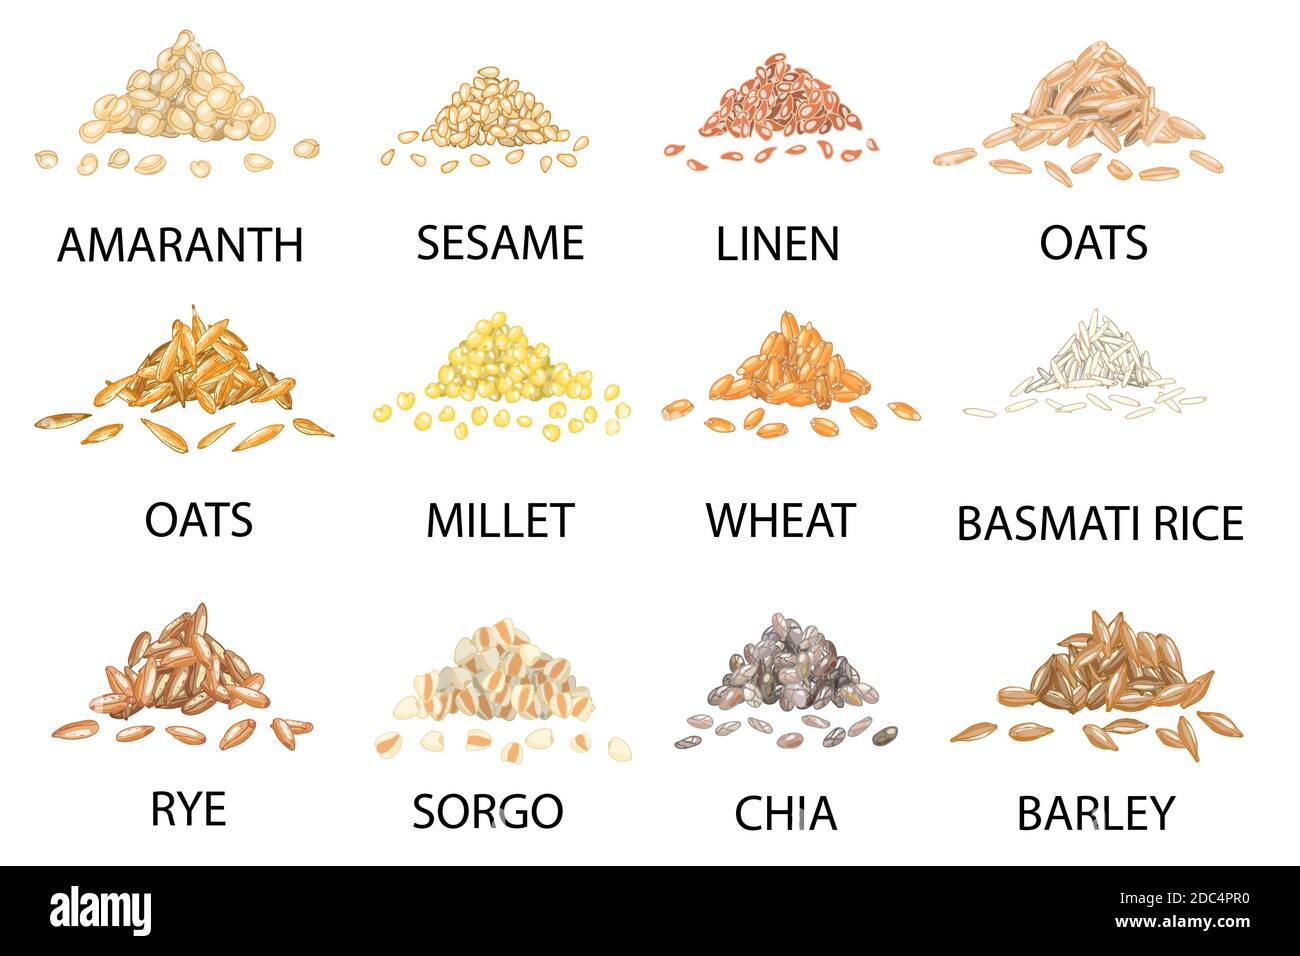 Set of hand drawn colored piles of cereal grains isolated on white. Amaranth, sesame, linen, oats, millet, wheat, rye, sorgo, chia, barley, rice. Styl Stock Vector